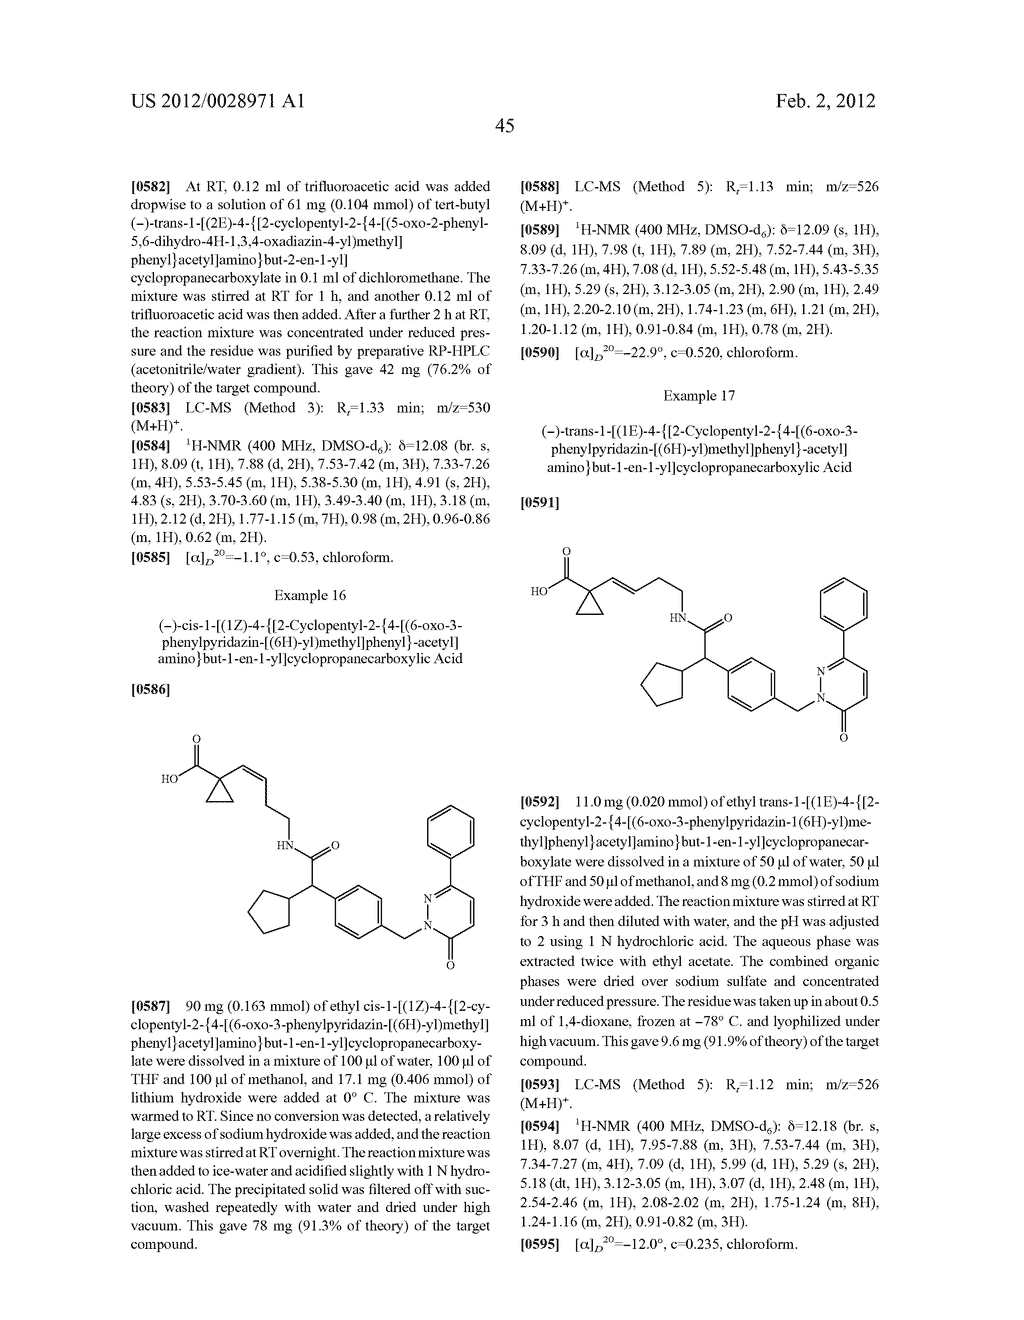 OXO-HETEROCYCLICALLY SUBSTITUTED ALKYL CARBOXYLIC ACIDS AND USE THEREOF - diagram, schematic, and image 46